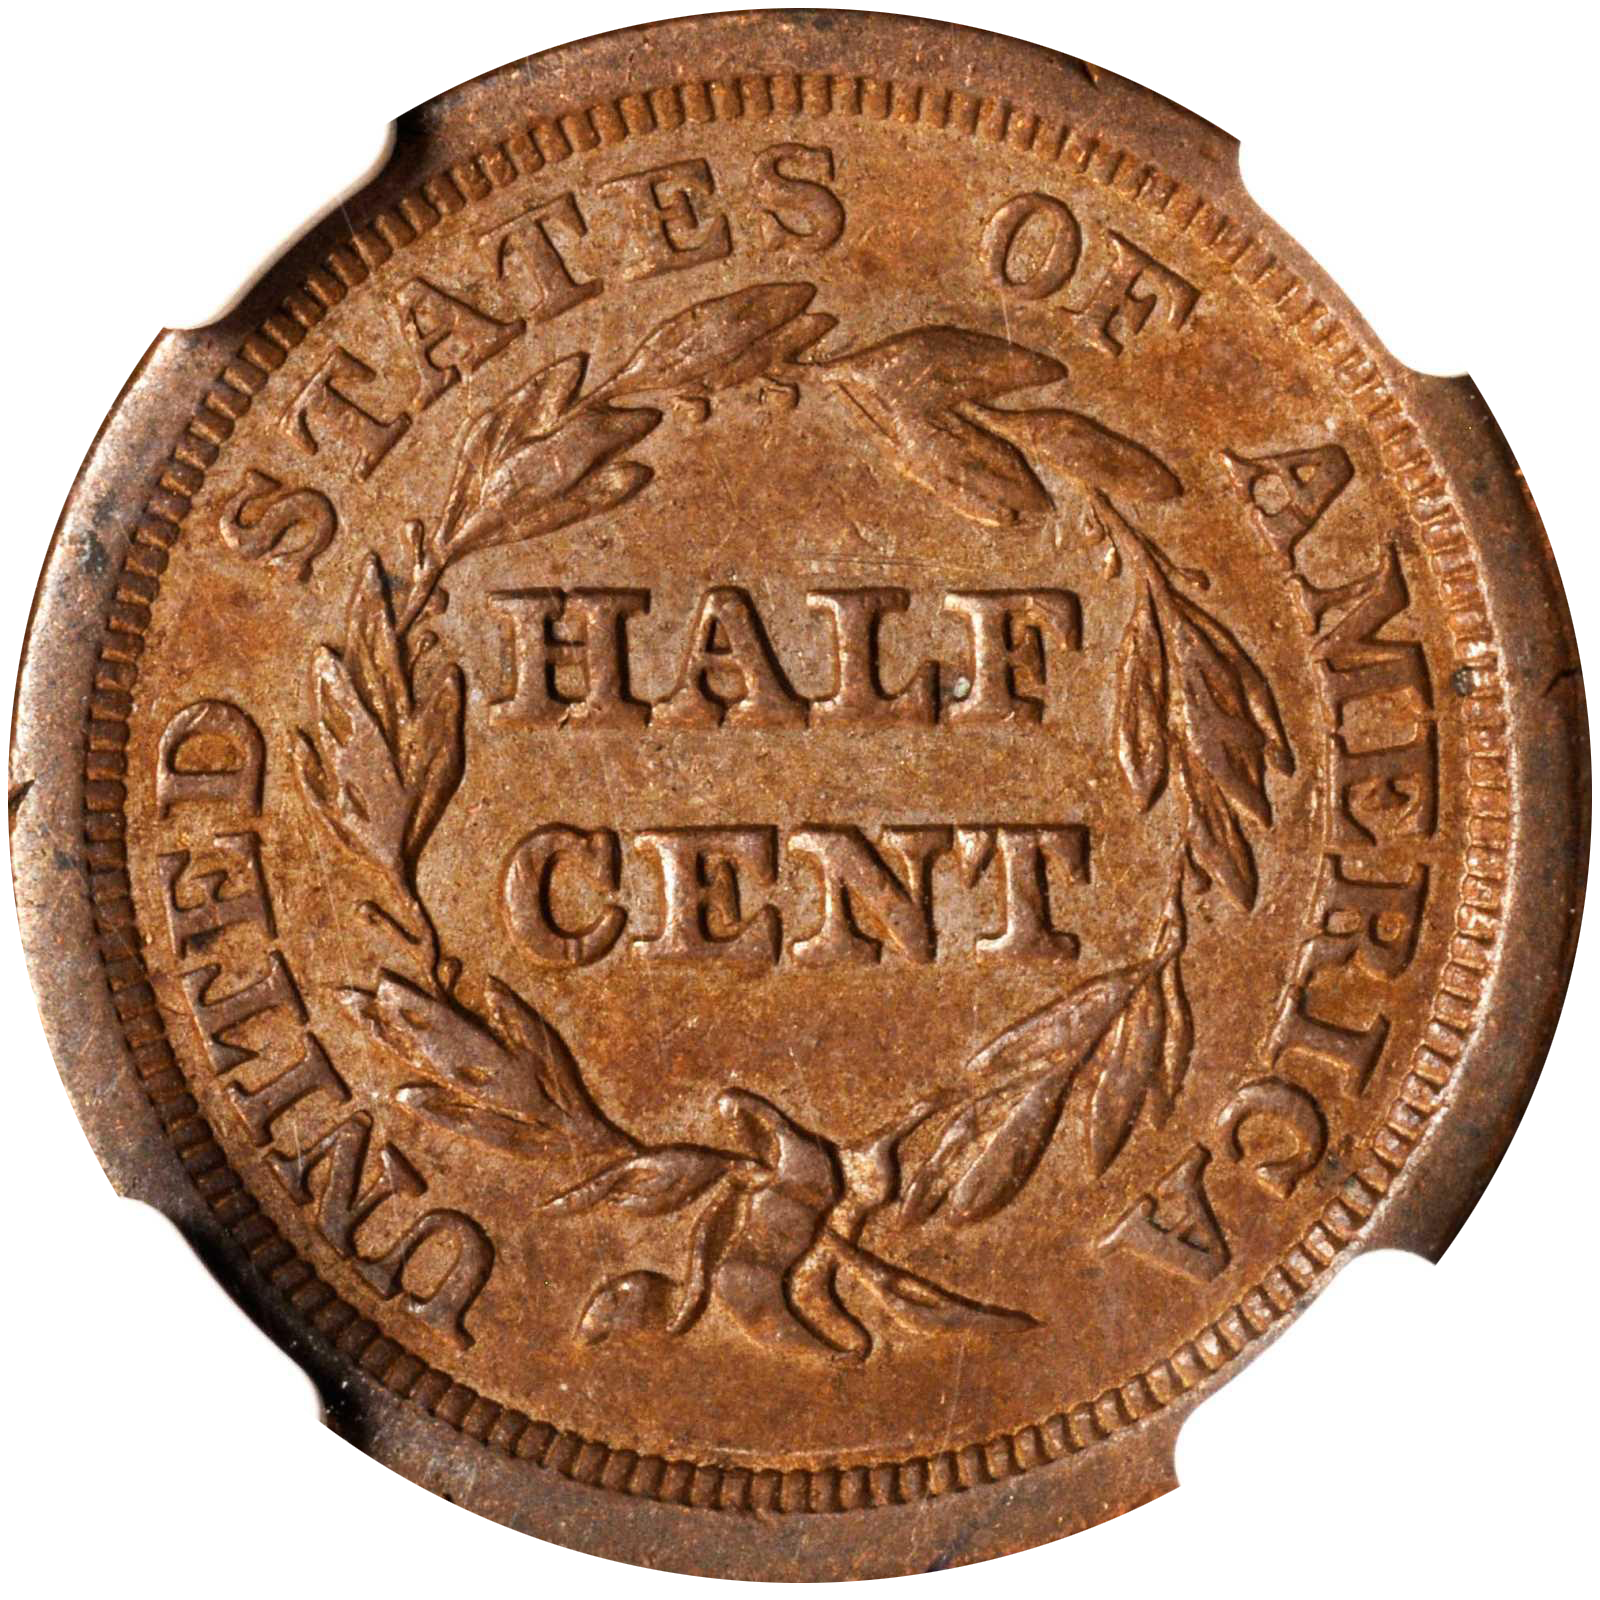 1853 Year Braided Hair US Half Cents (1840-1857) for sale